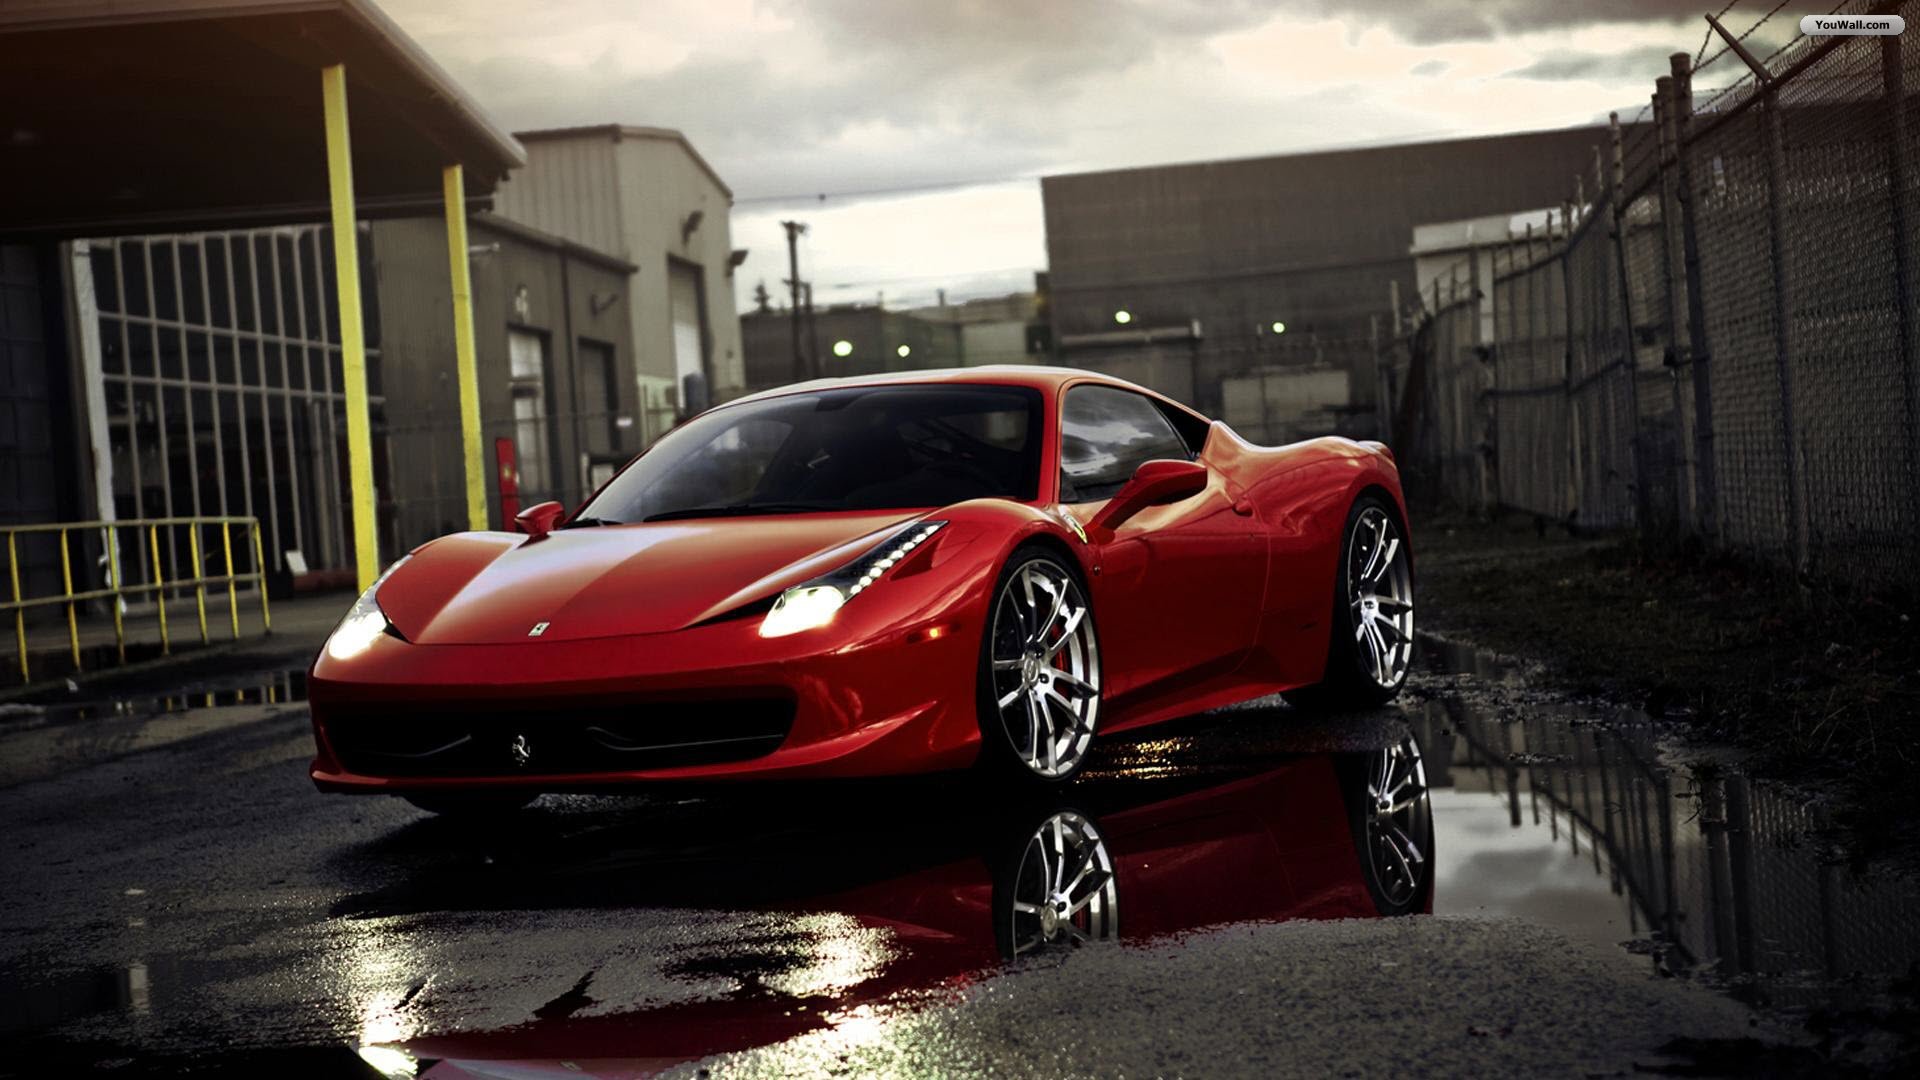 Ferrari Wallpaper - HD Wallpapers Backgrounds of Your Choice